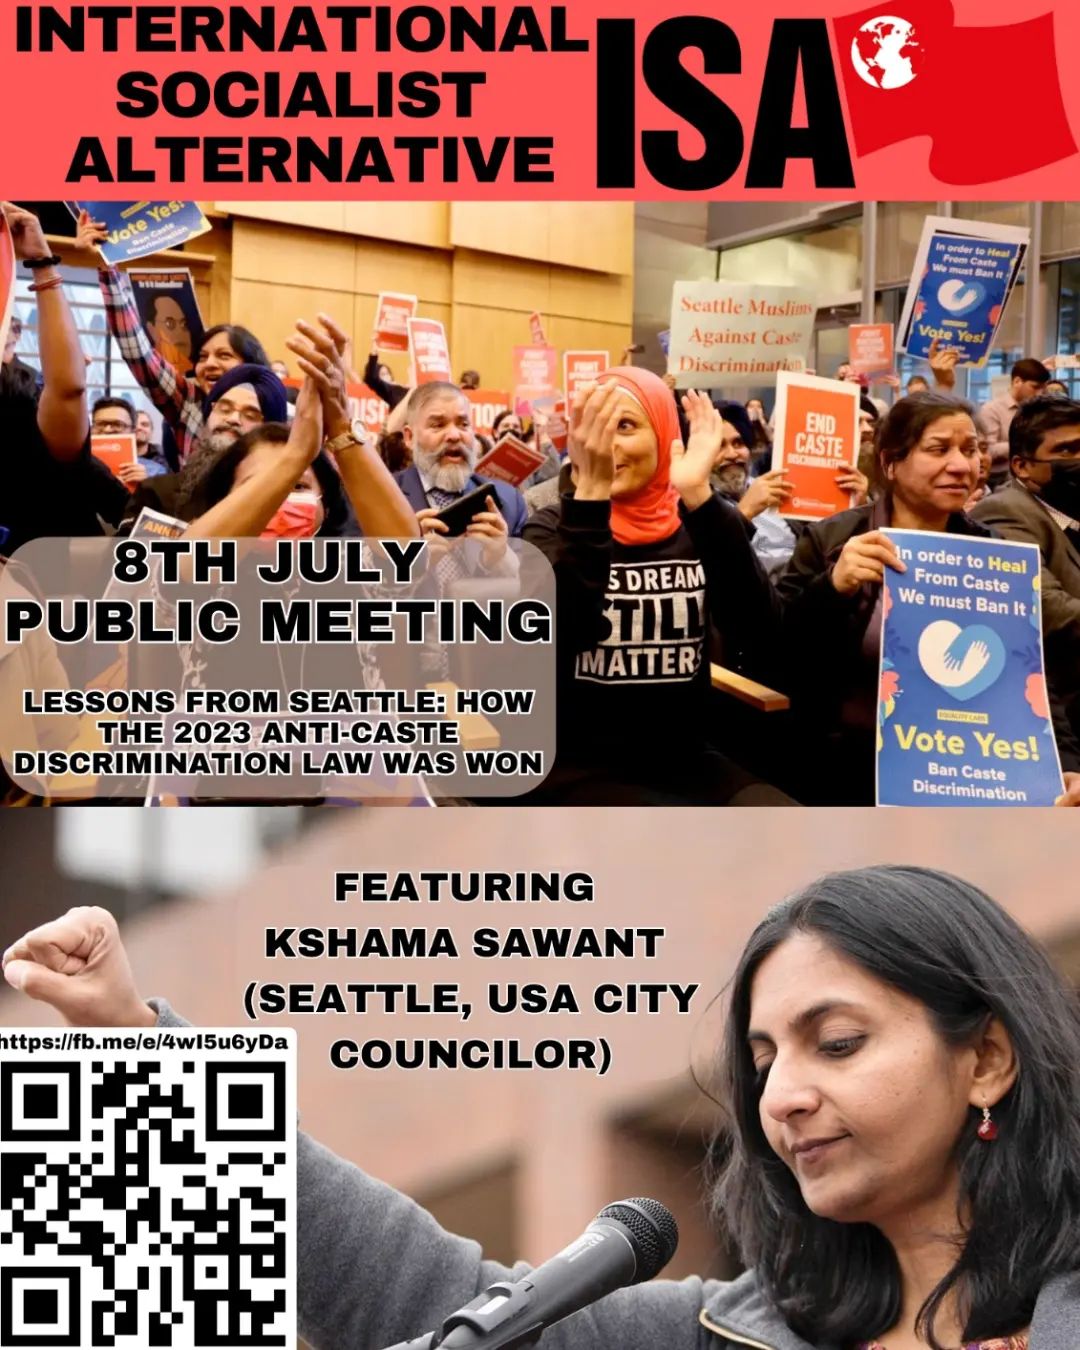 8th July Public Meeting. Lessons From Seattle: How The 2023 Anti-Caste Discrimination Law Was Won